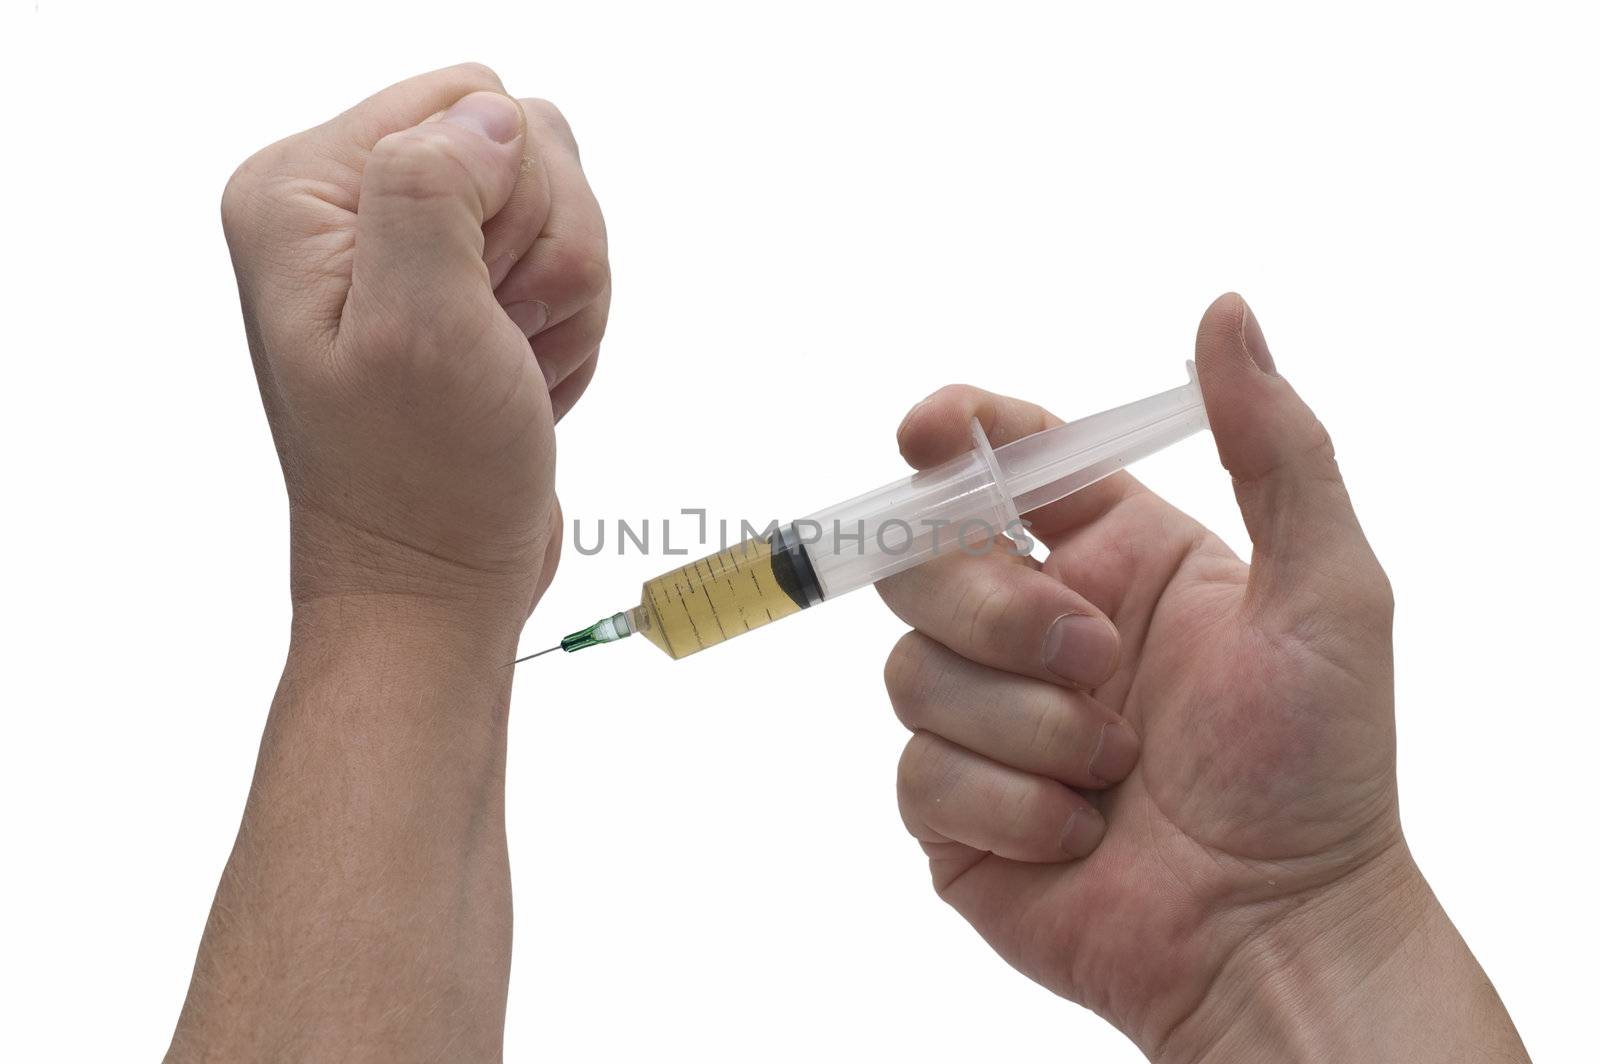 an isolated over white image of a caucasian man's hands holding about to inject a hyperdermic needle. uses could include drug addiction or self medication.